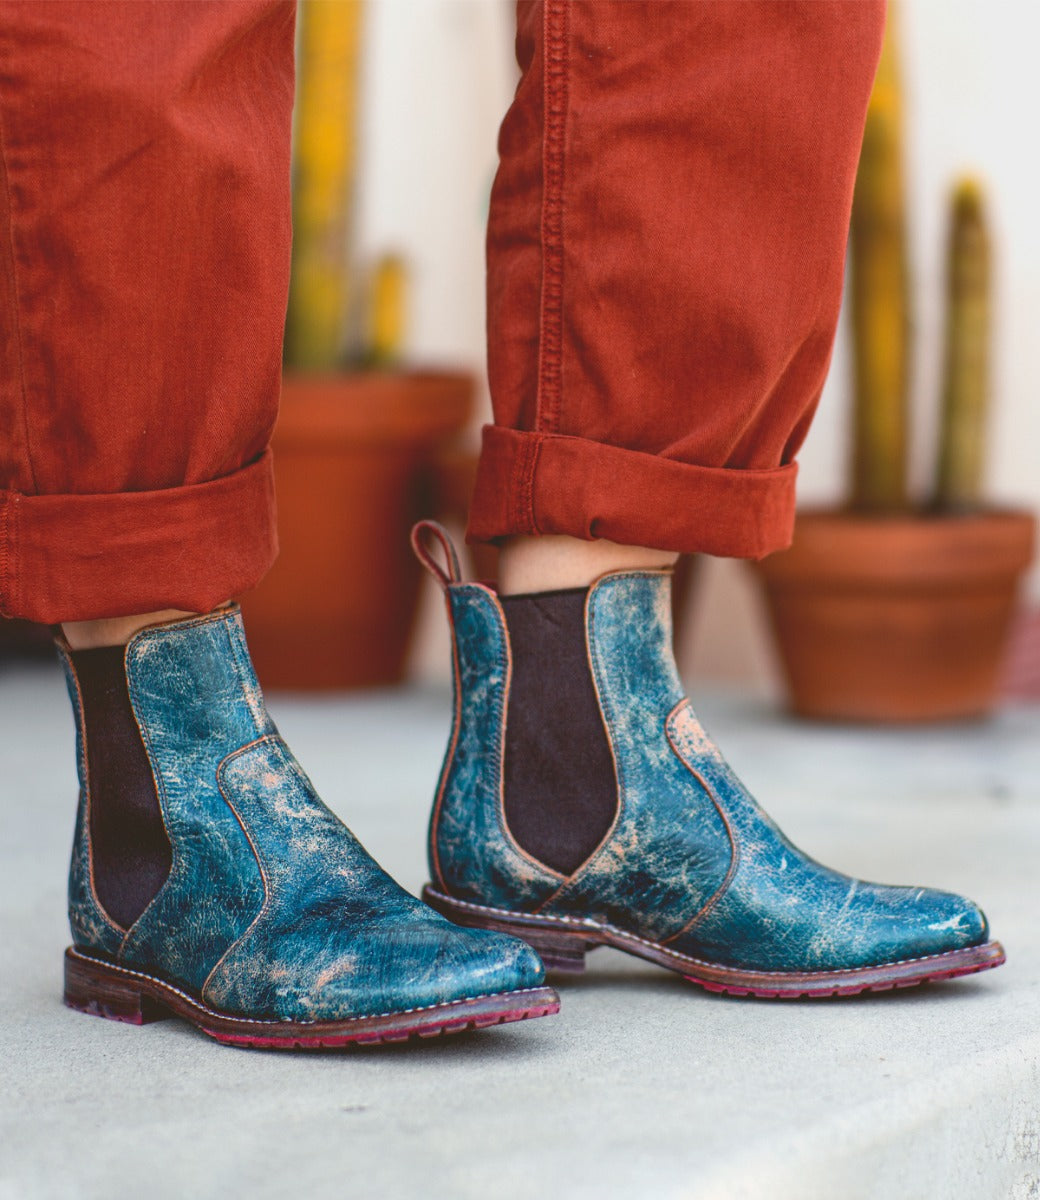 A person wearing Nandi leather boots in teal lux.